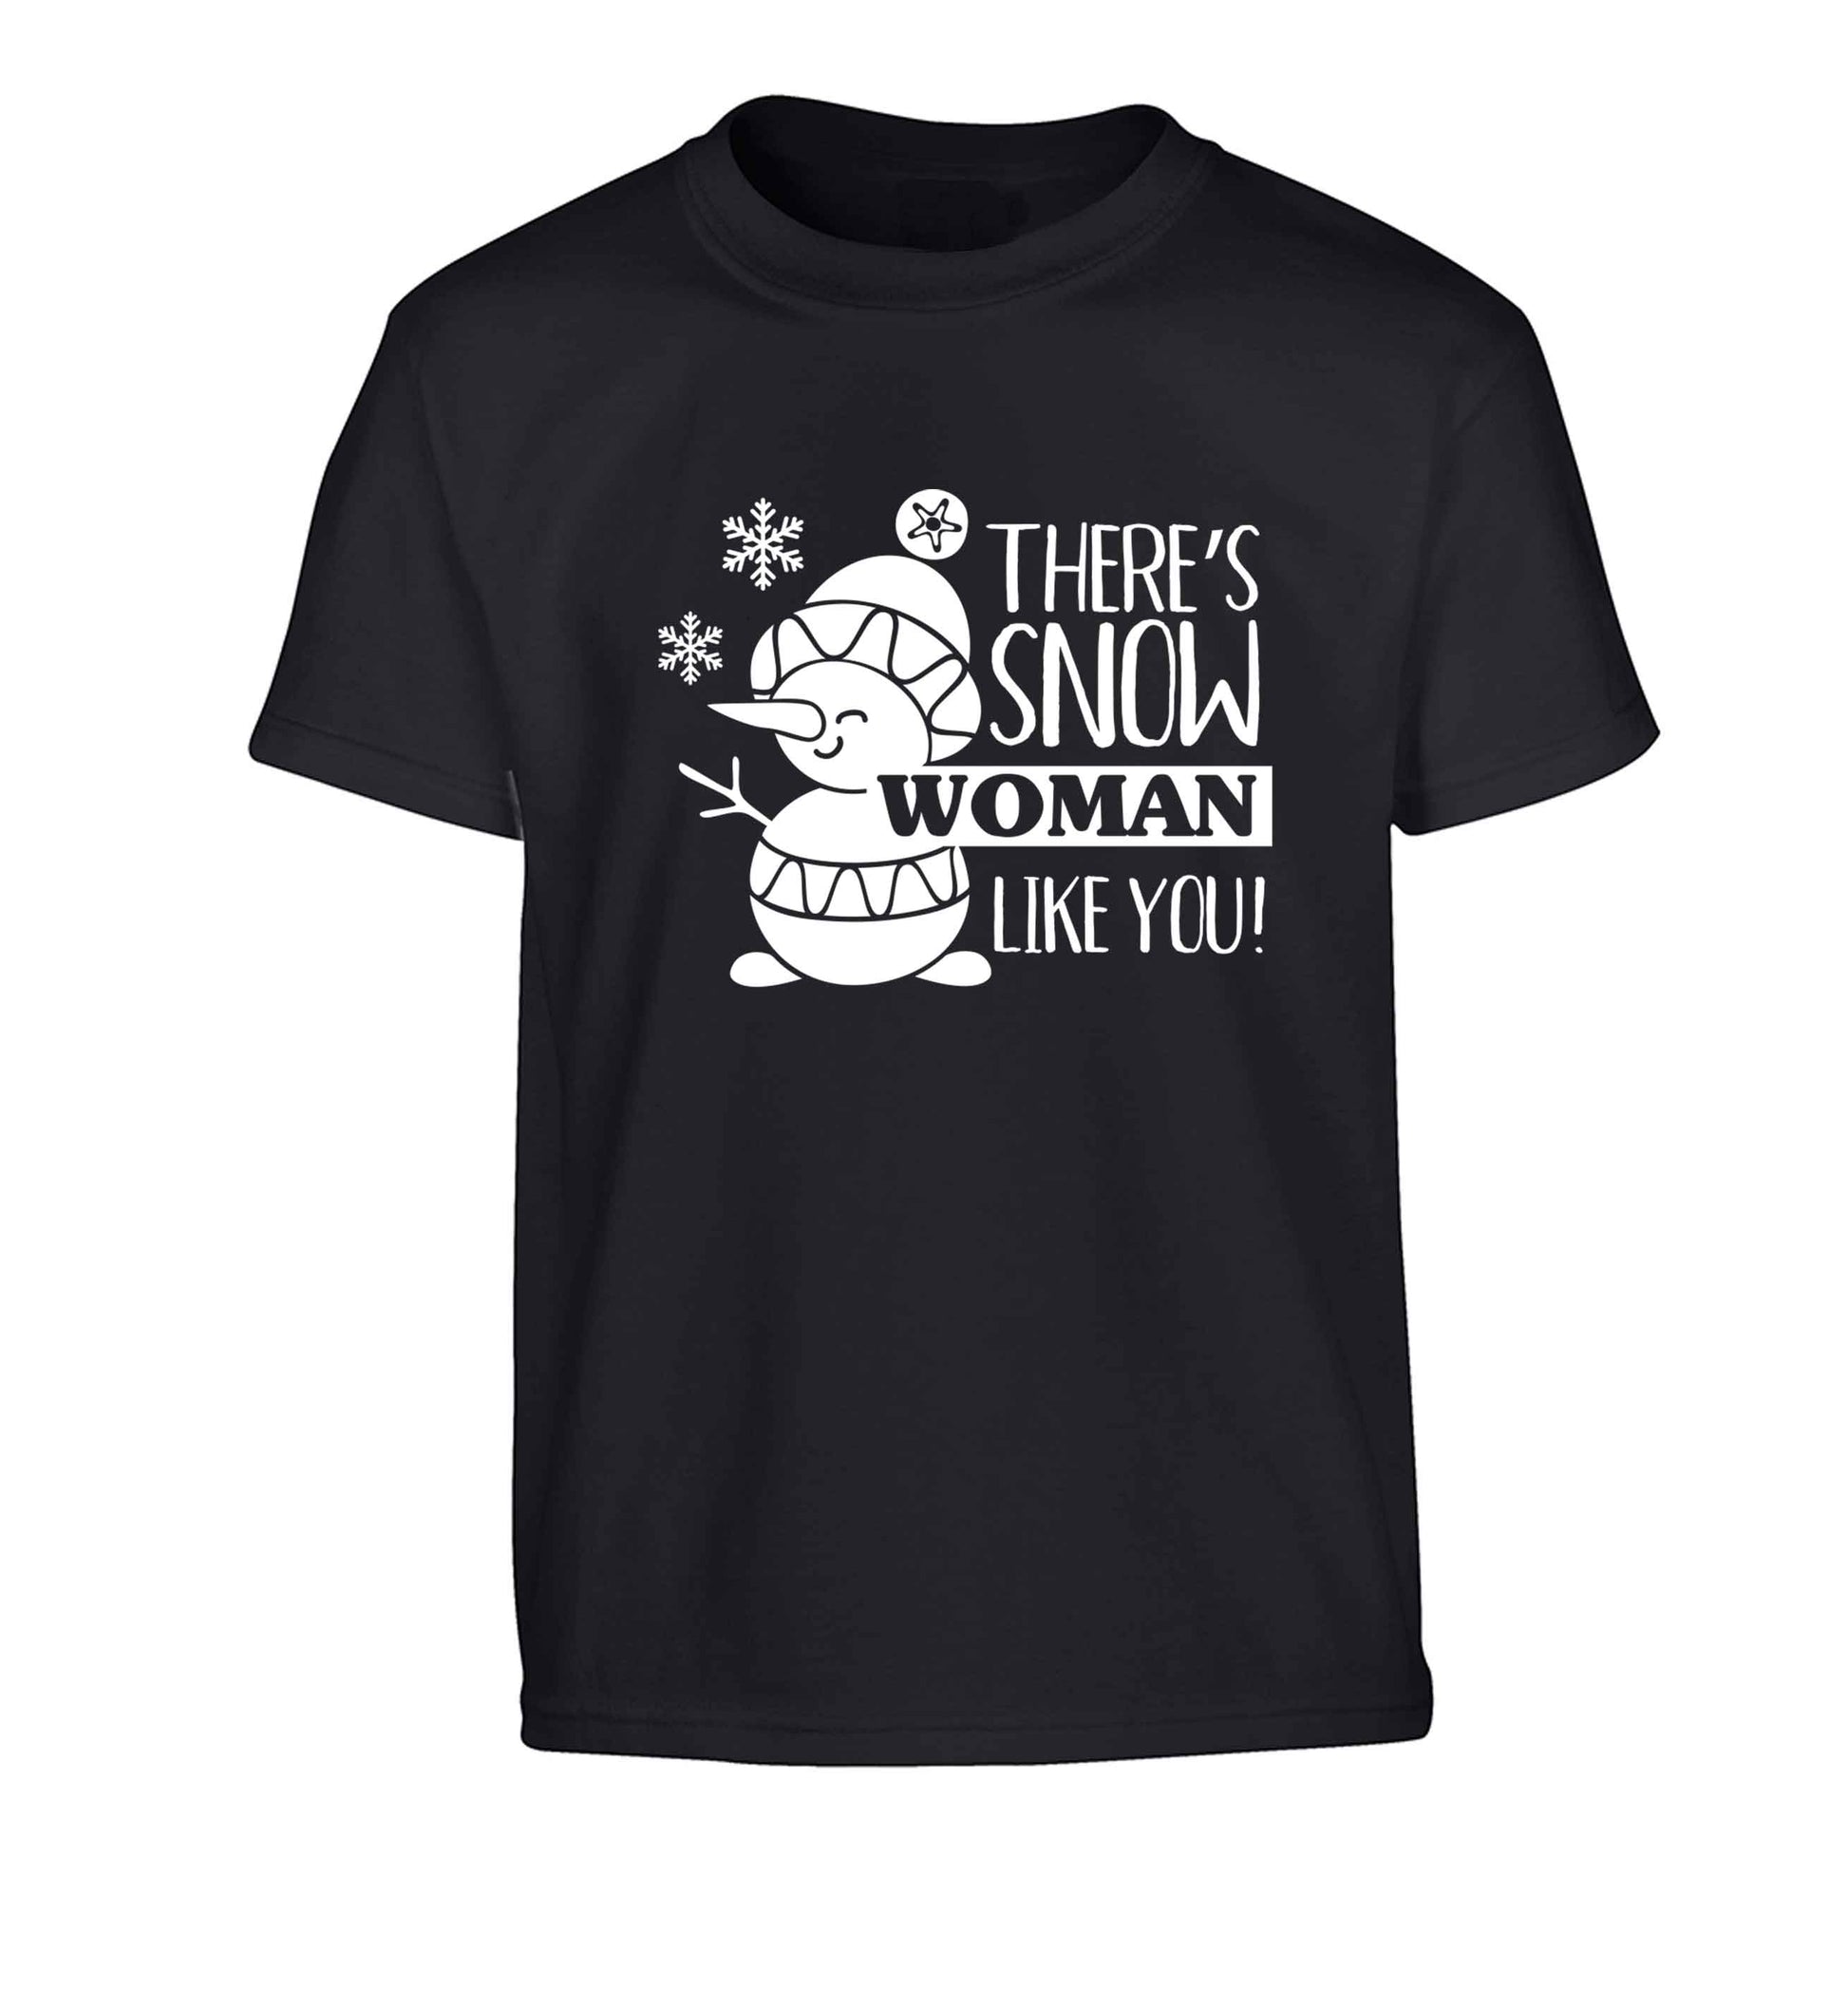 There's snow woman like you Children's black Tshirt 12-13 Years